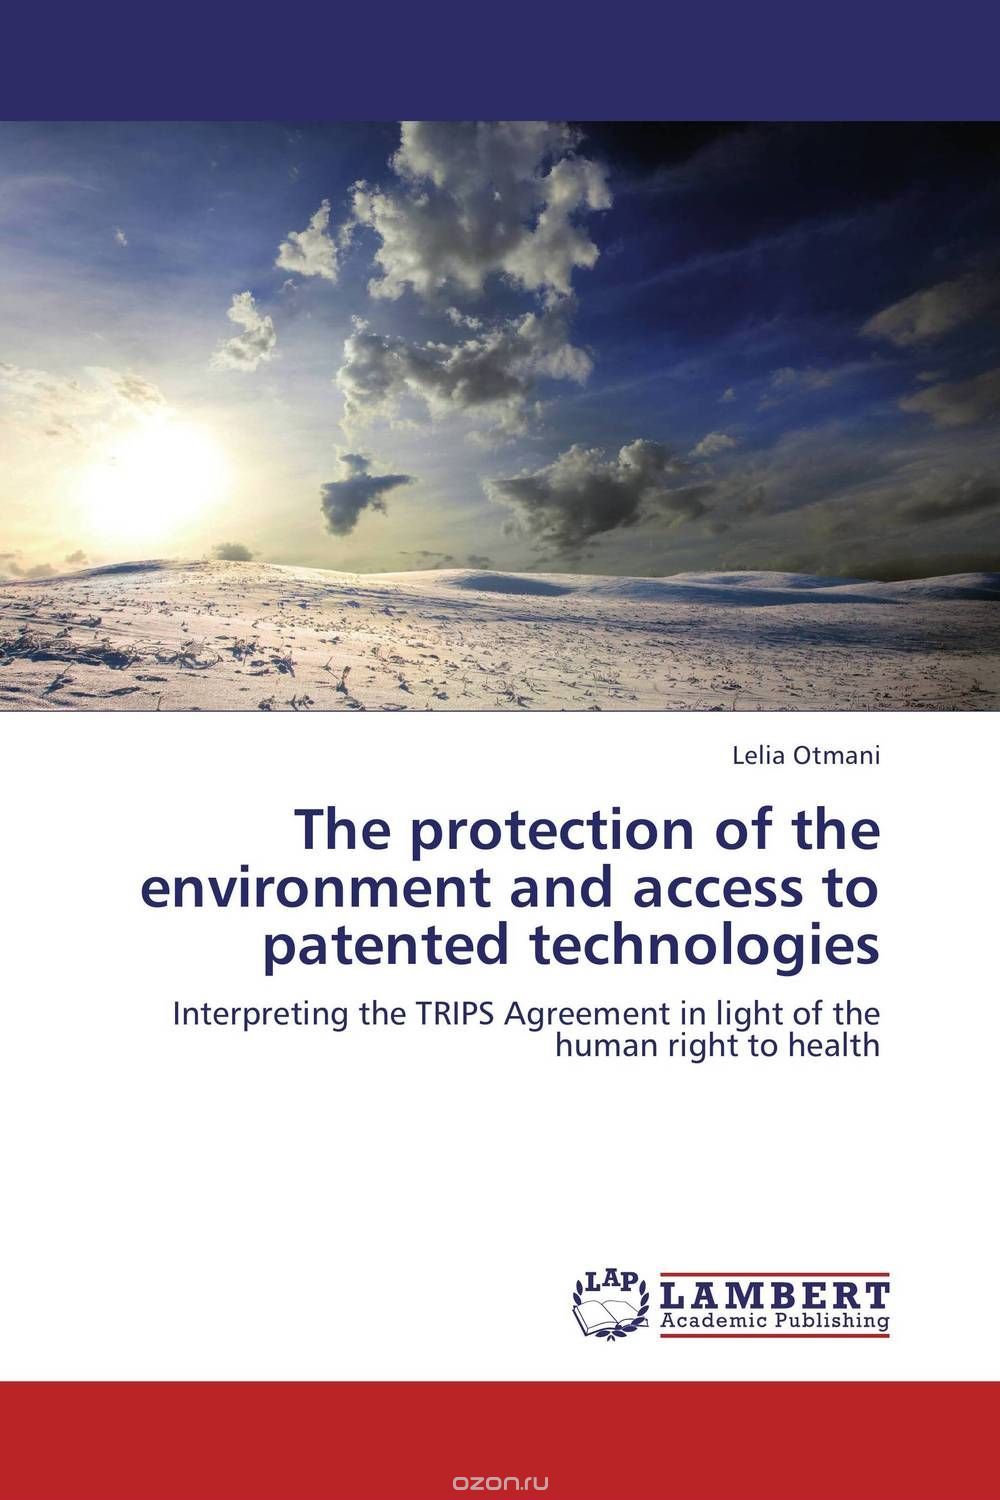 Скачать книгу "The protection of the environment and access to patented technologies"